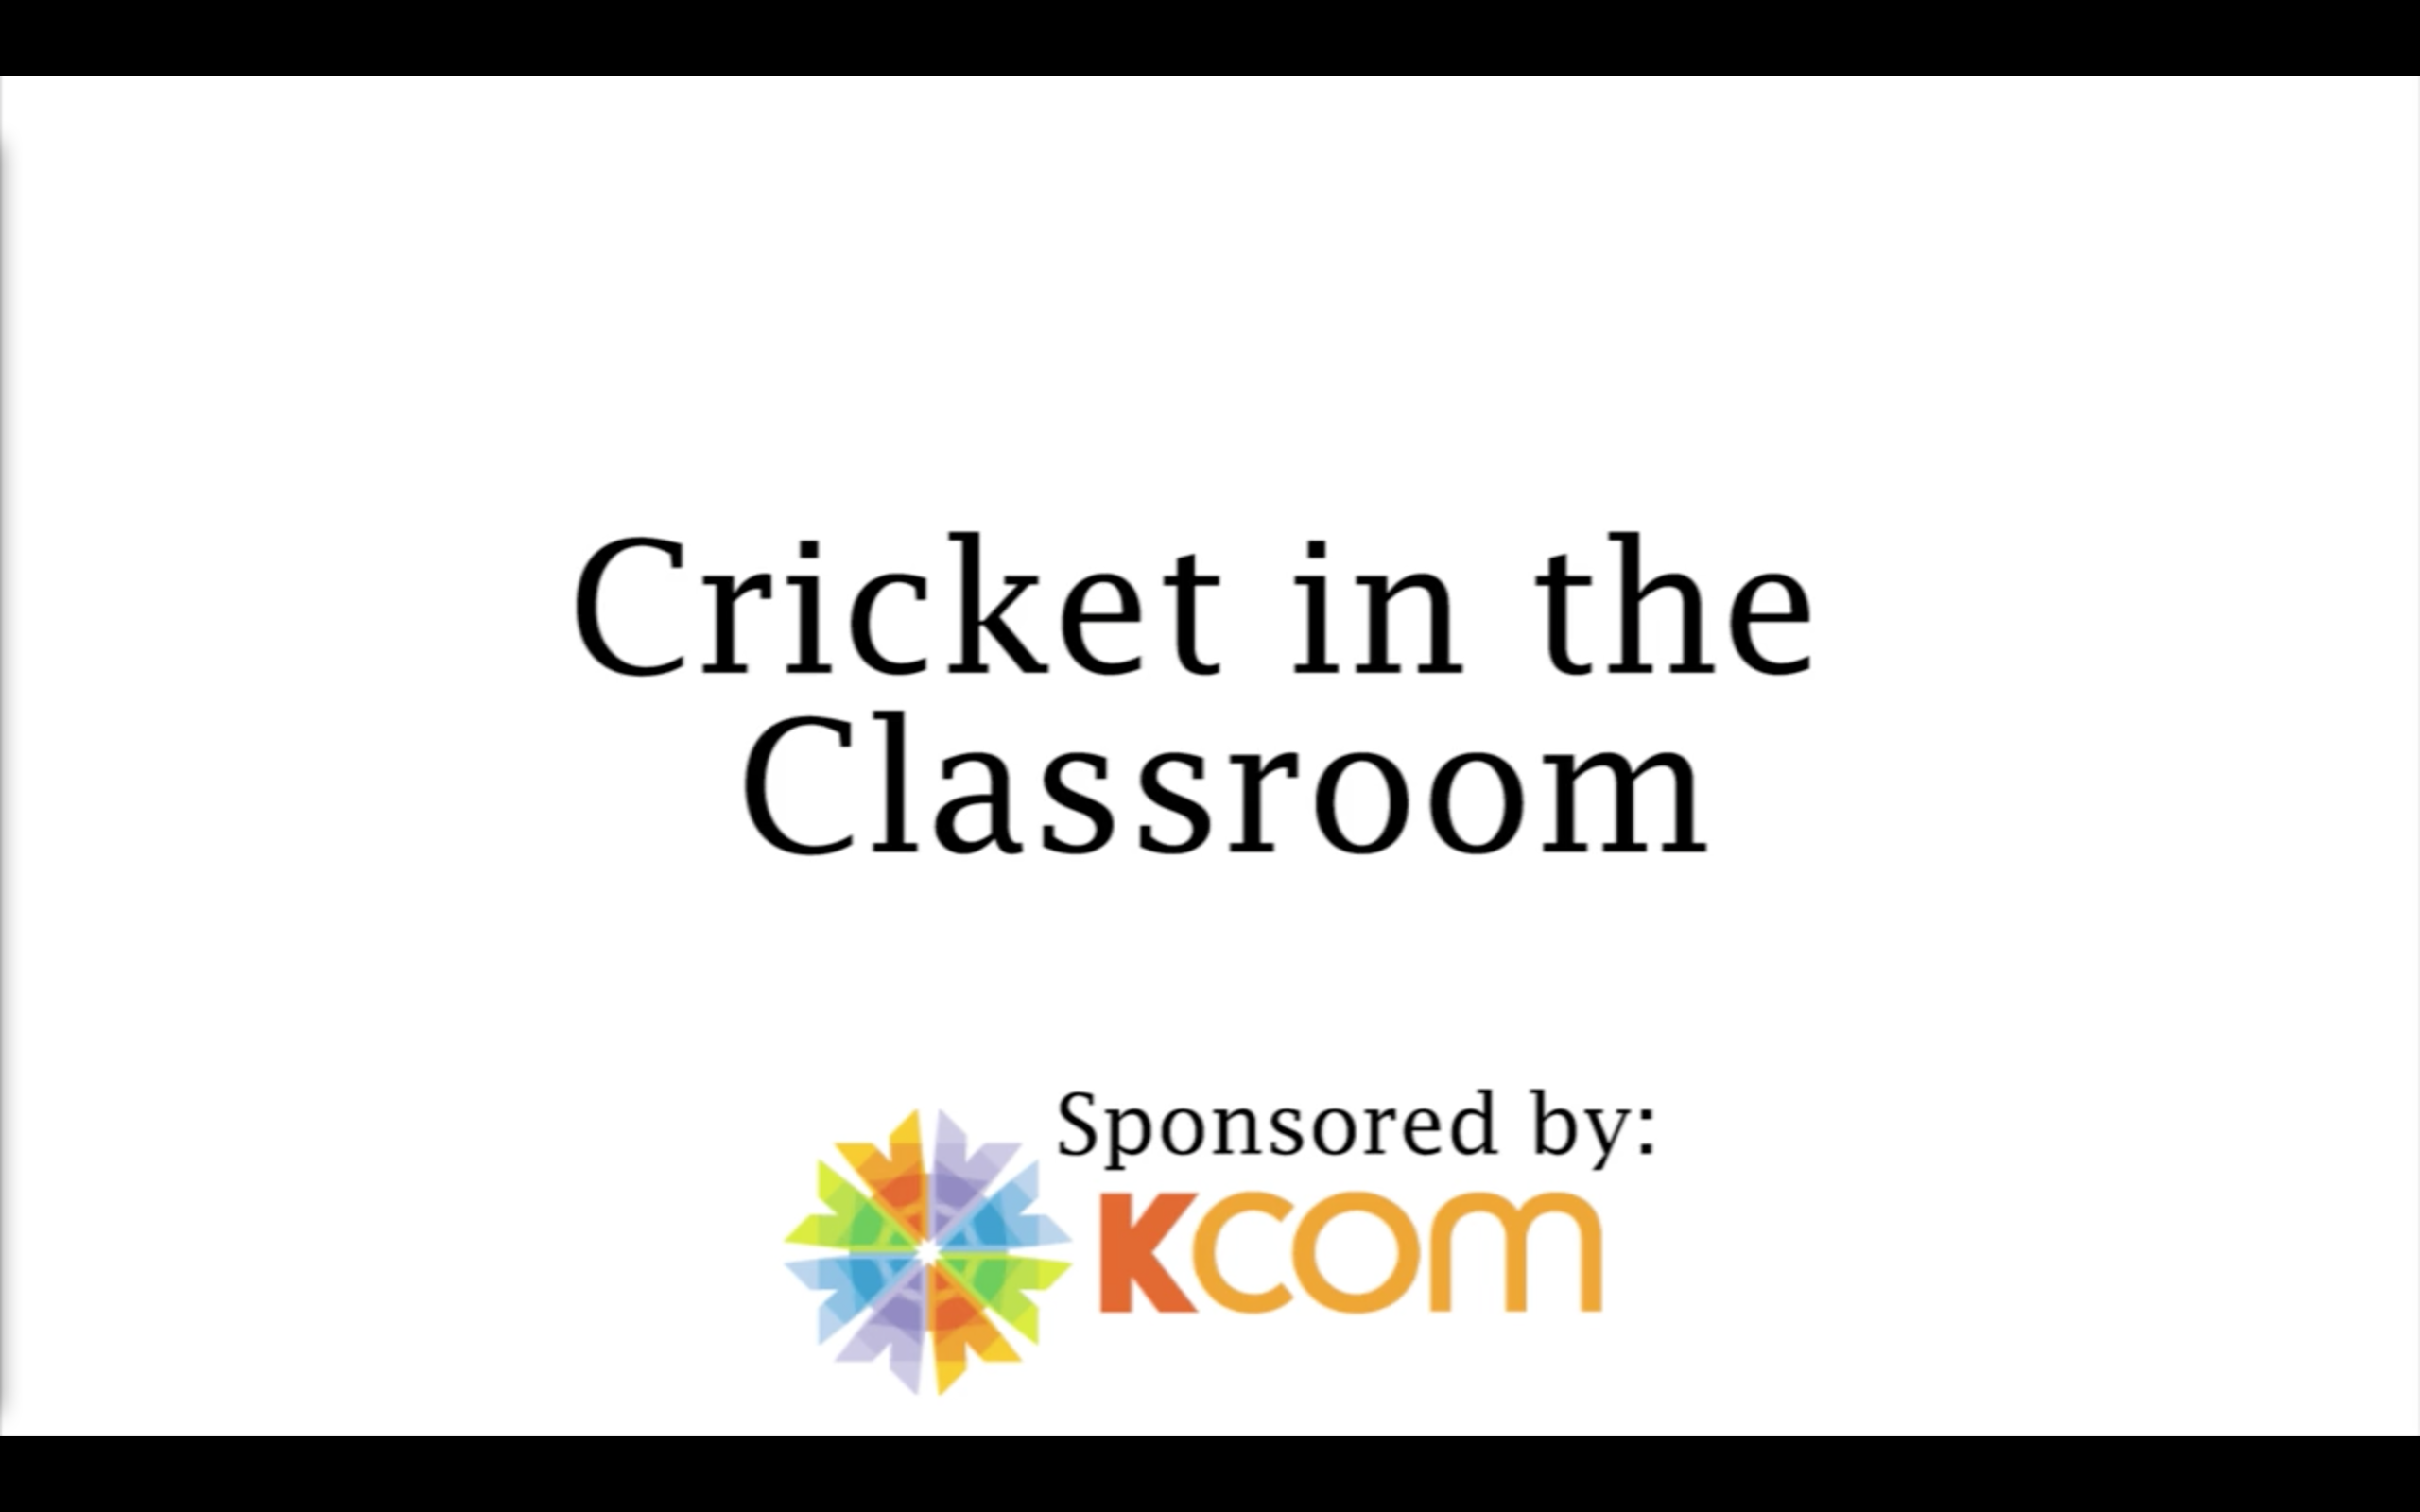 Cricket in the Classroom